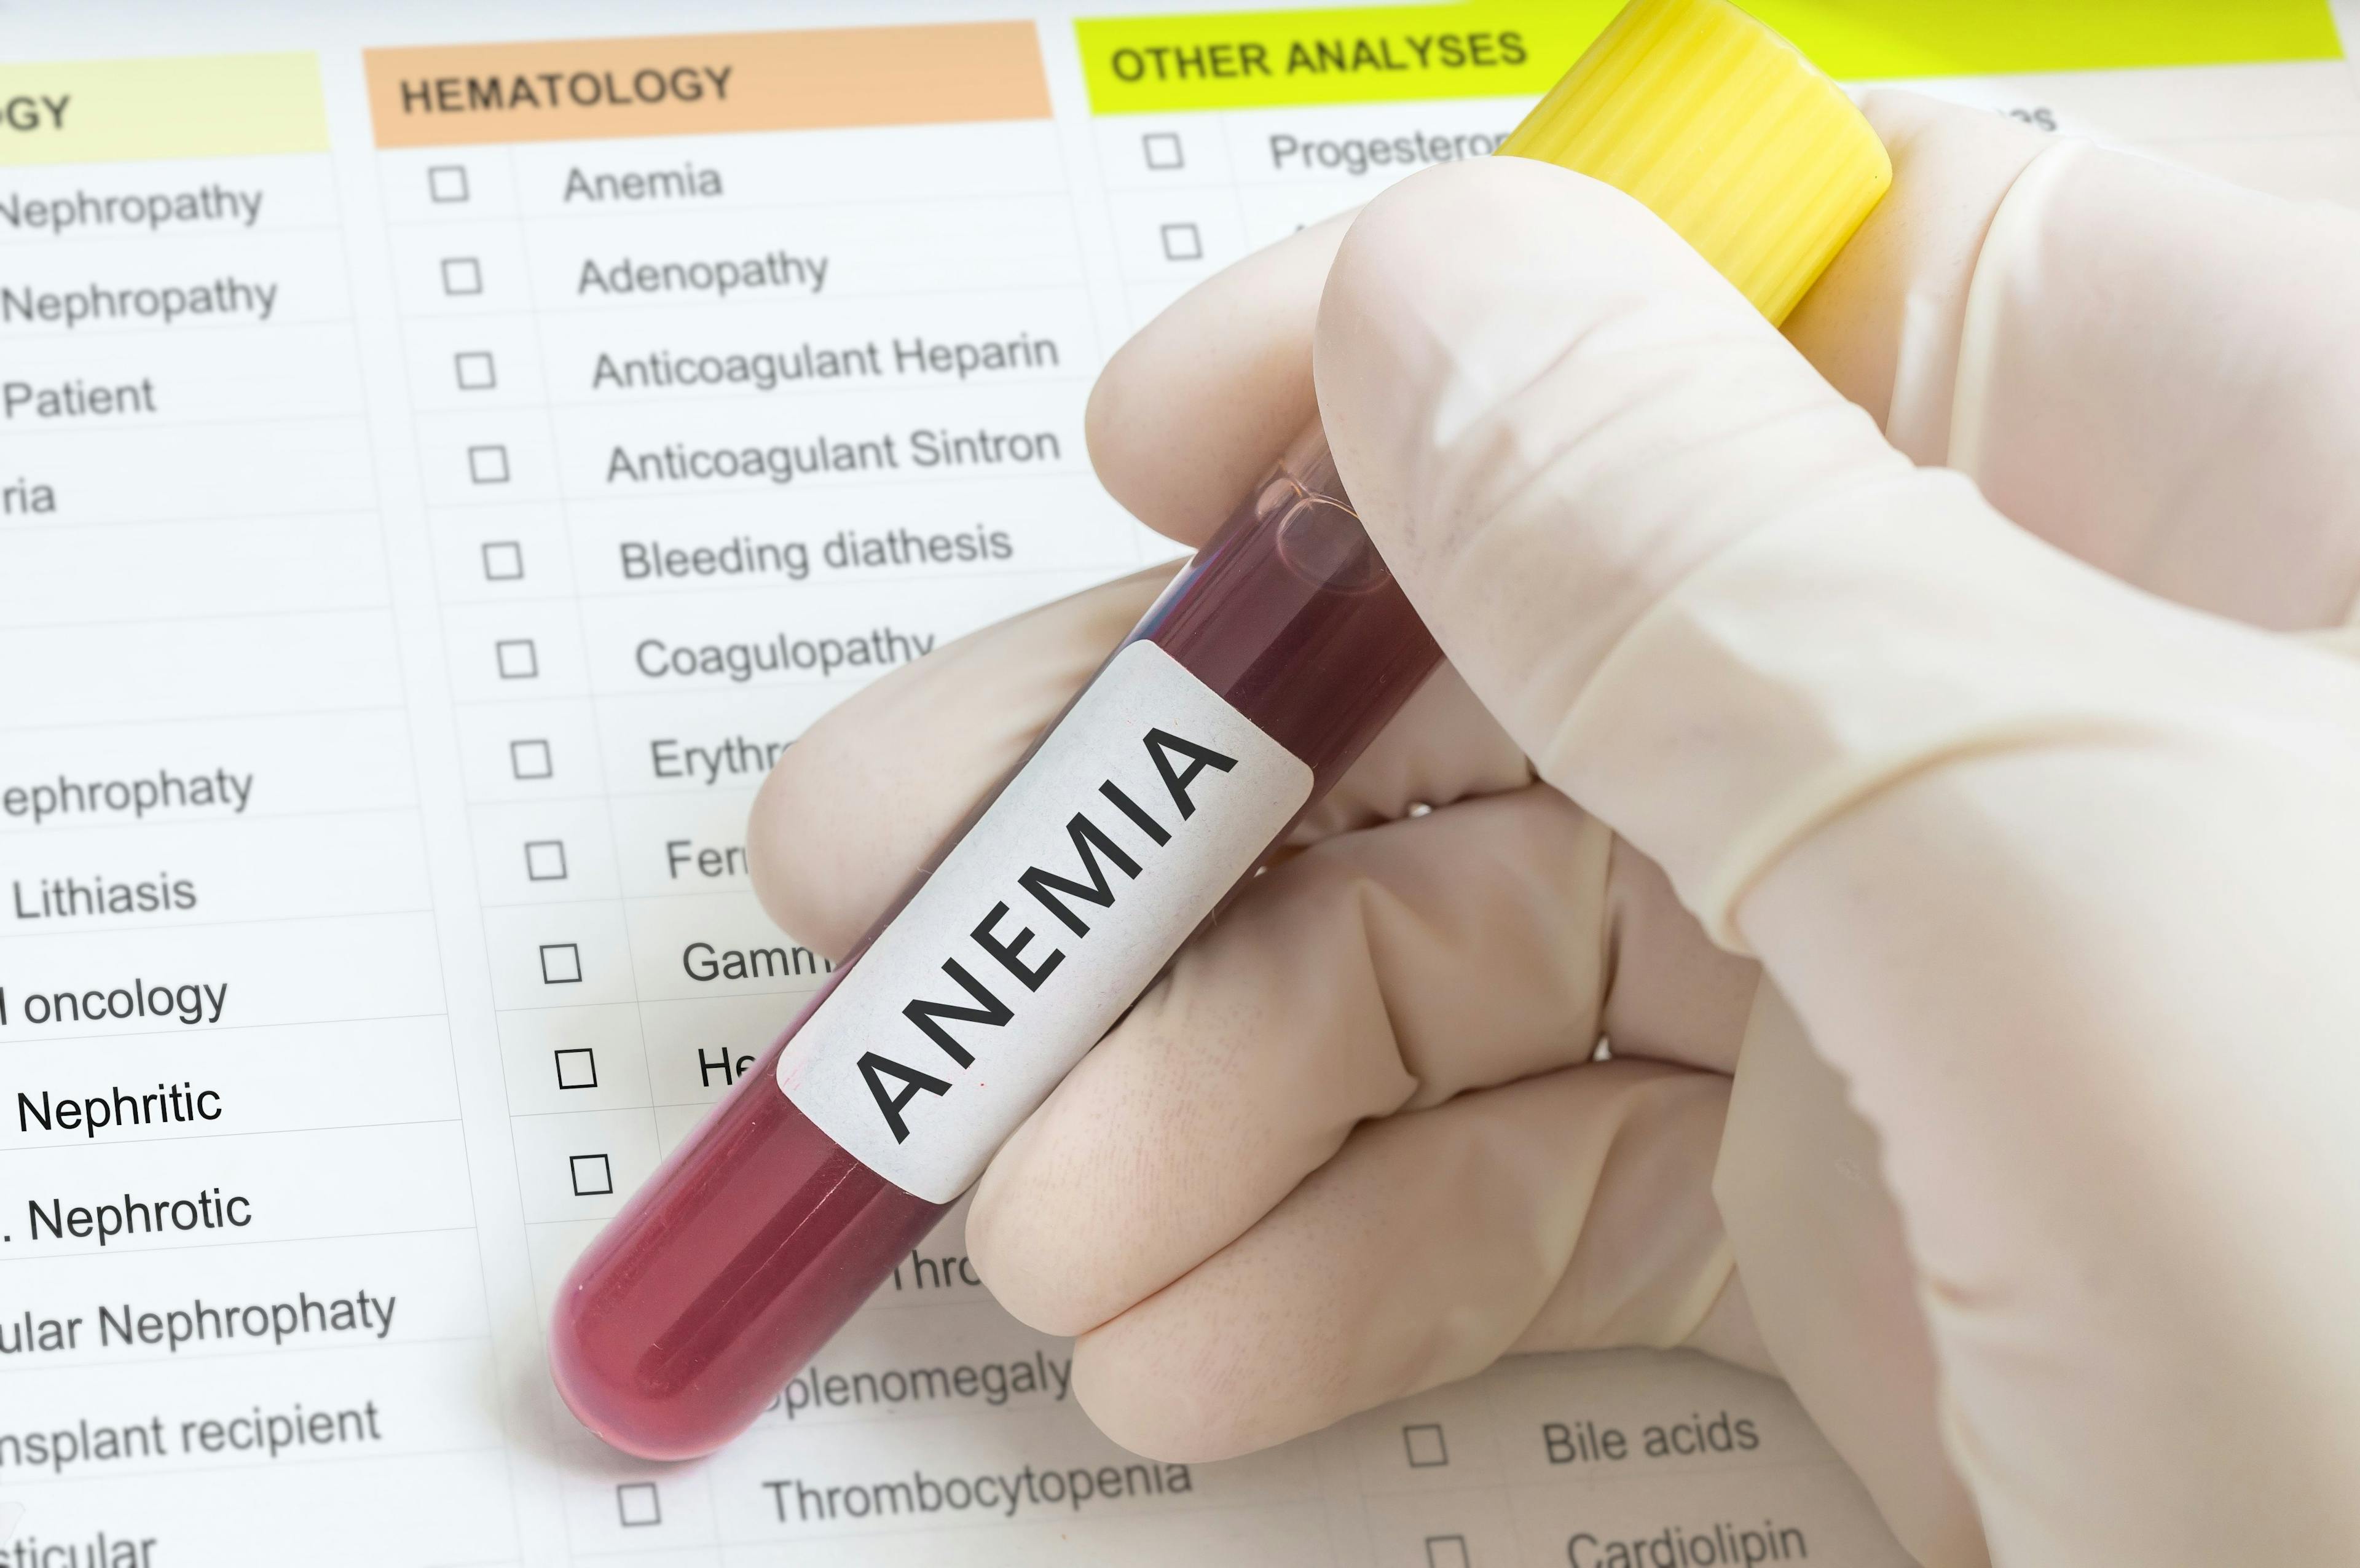 Anemia Significantly Correlated With COVID-19 Mortality